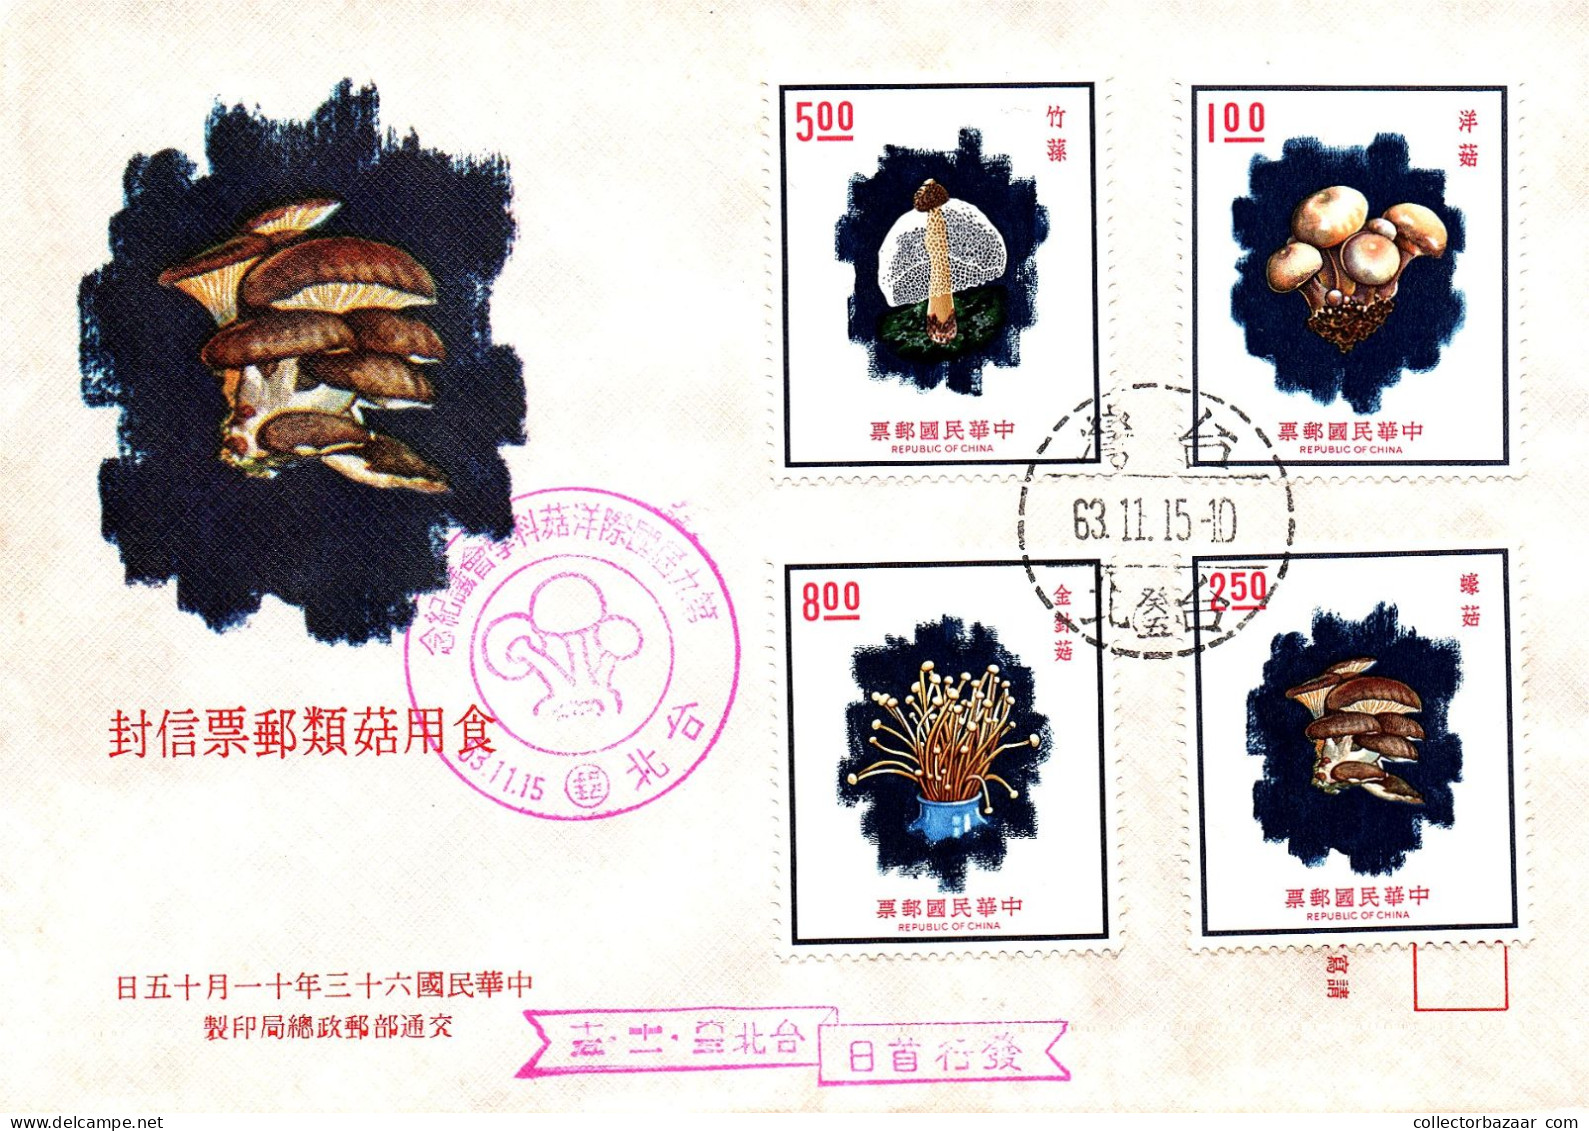 Taiwan Formosa Republic Of China FDC Art Painting Drawing Different Mushrooms - 8$,5$,2.50$ And 1$ Stamps - FDC